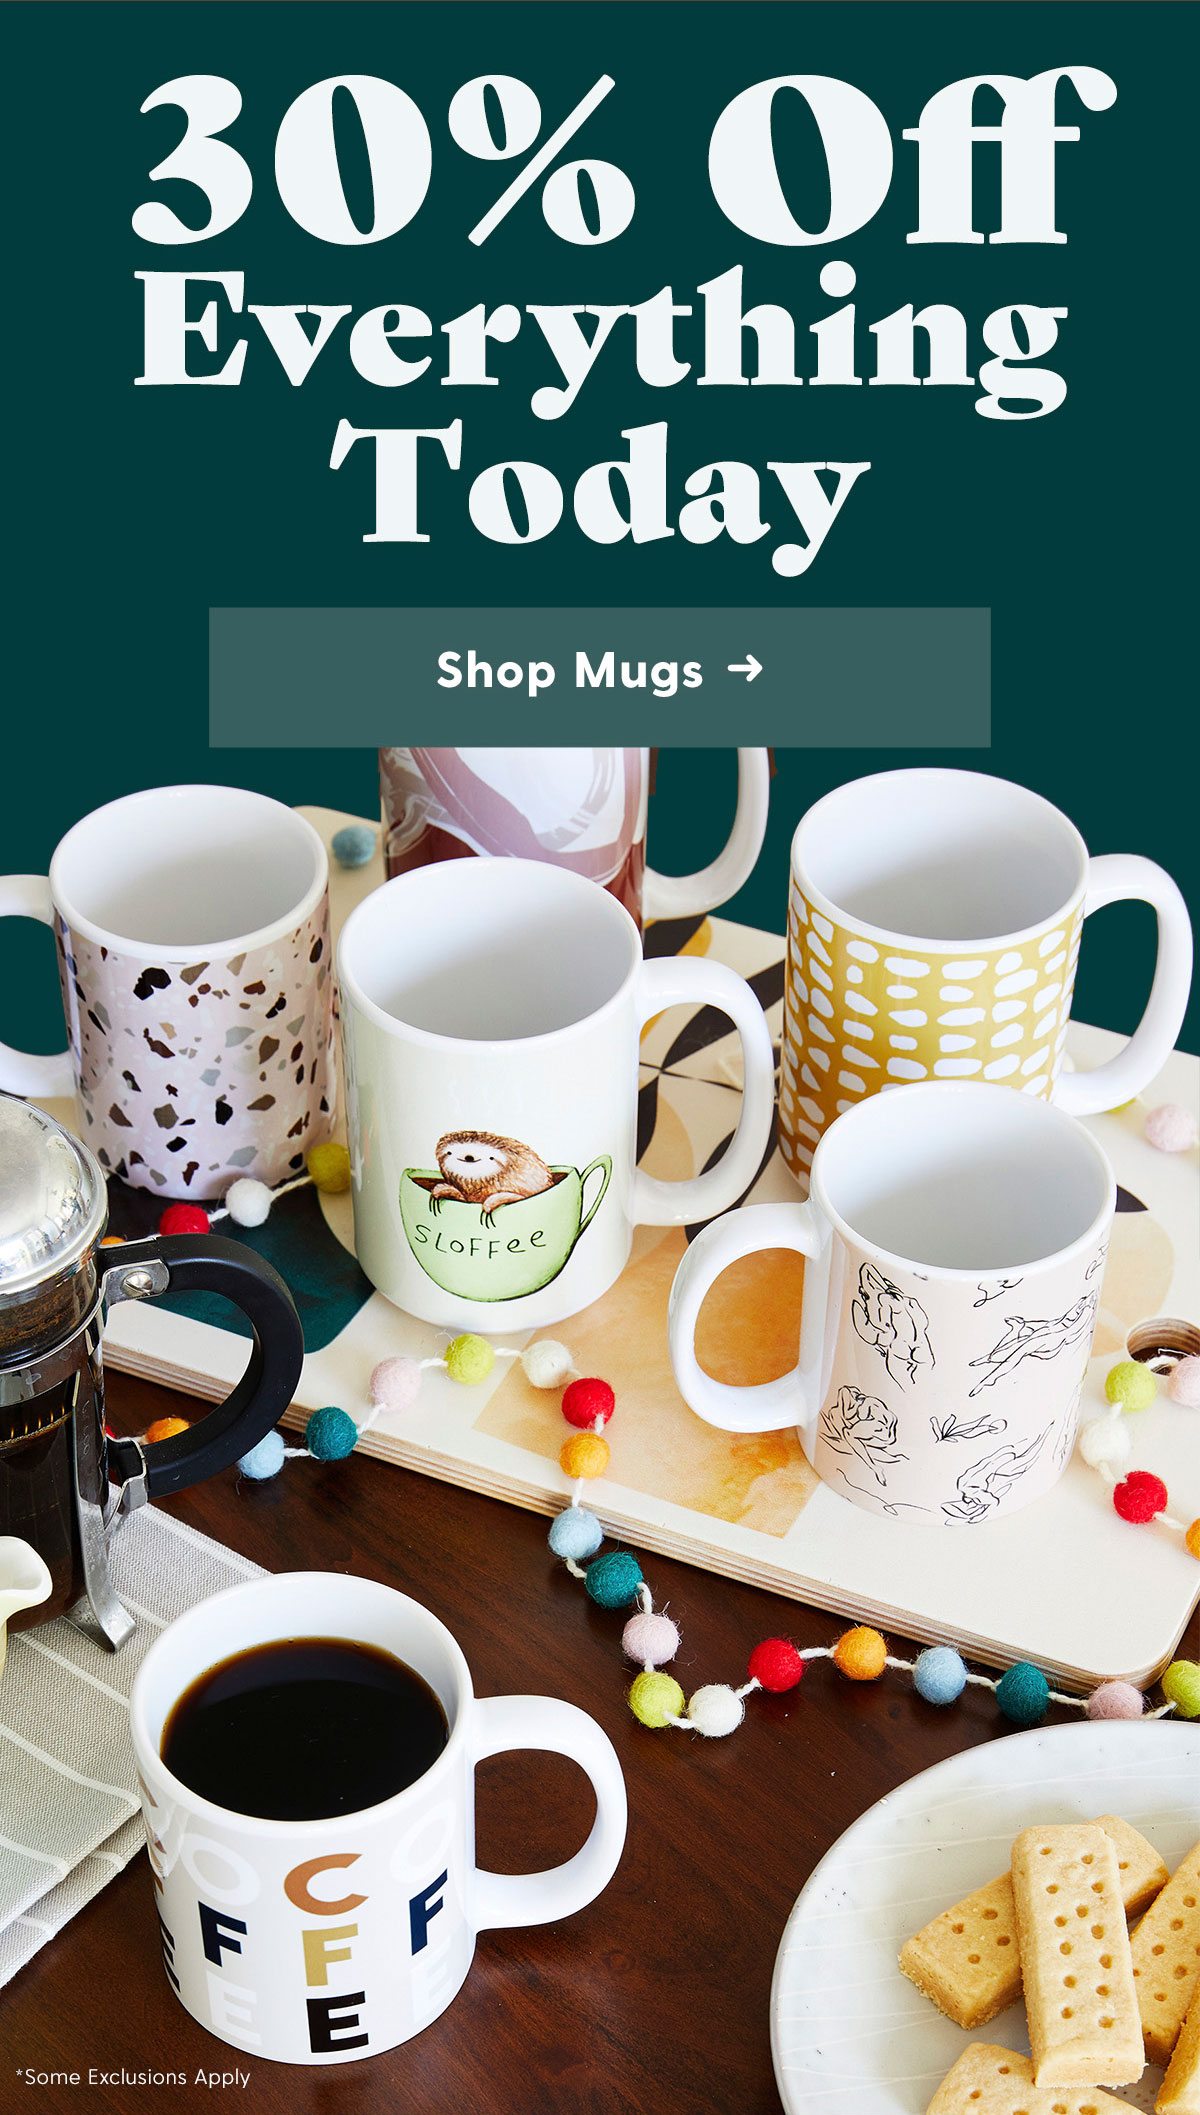 30% Off Everything Today. Shop Mugs →